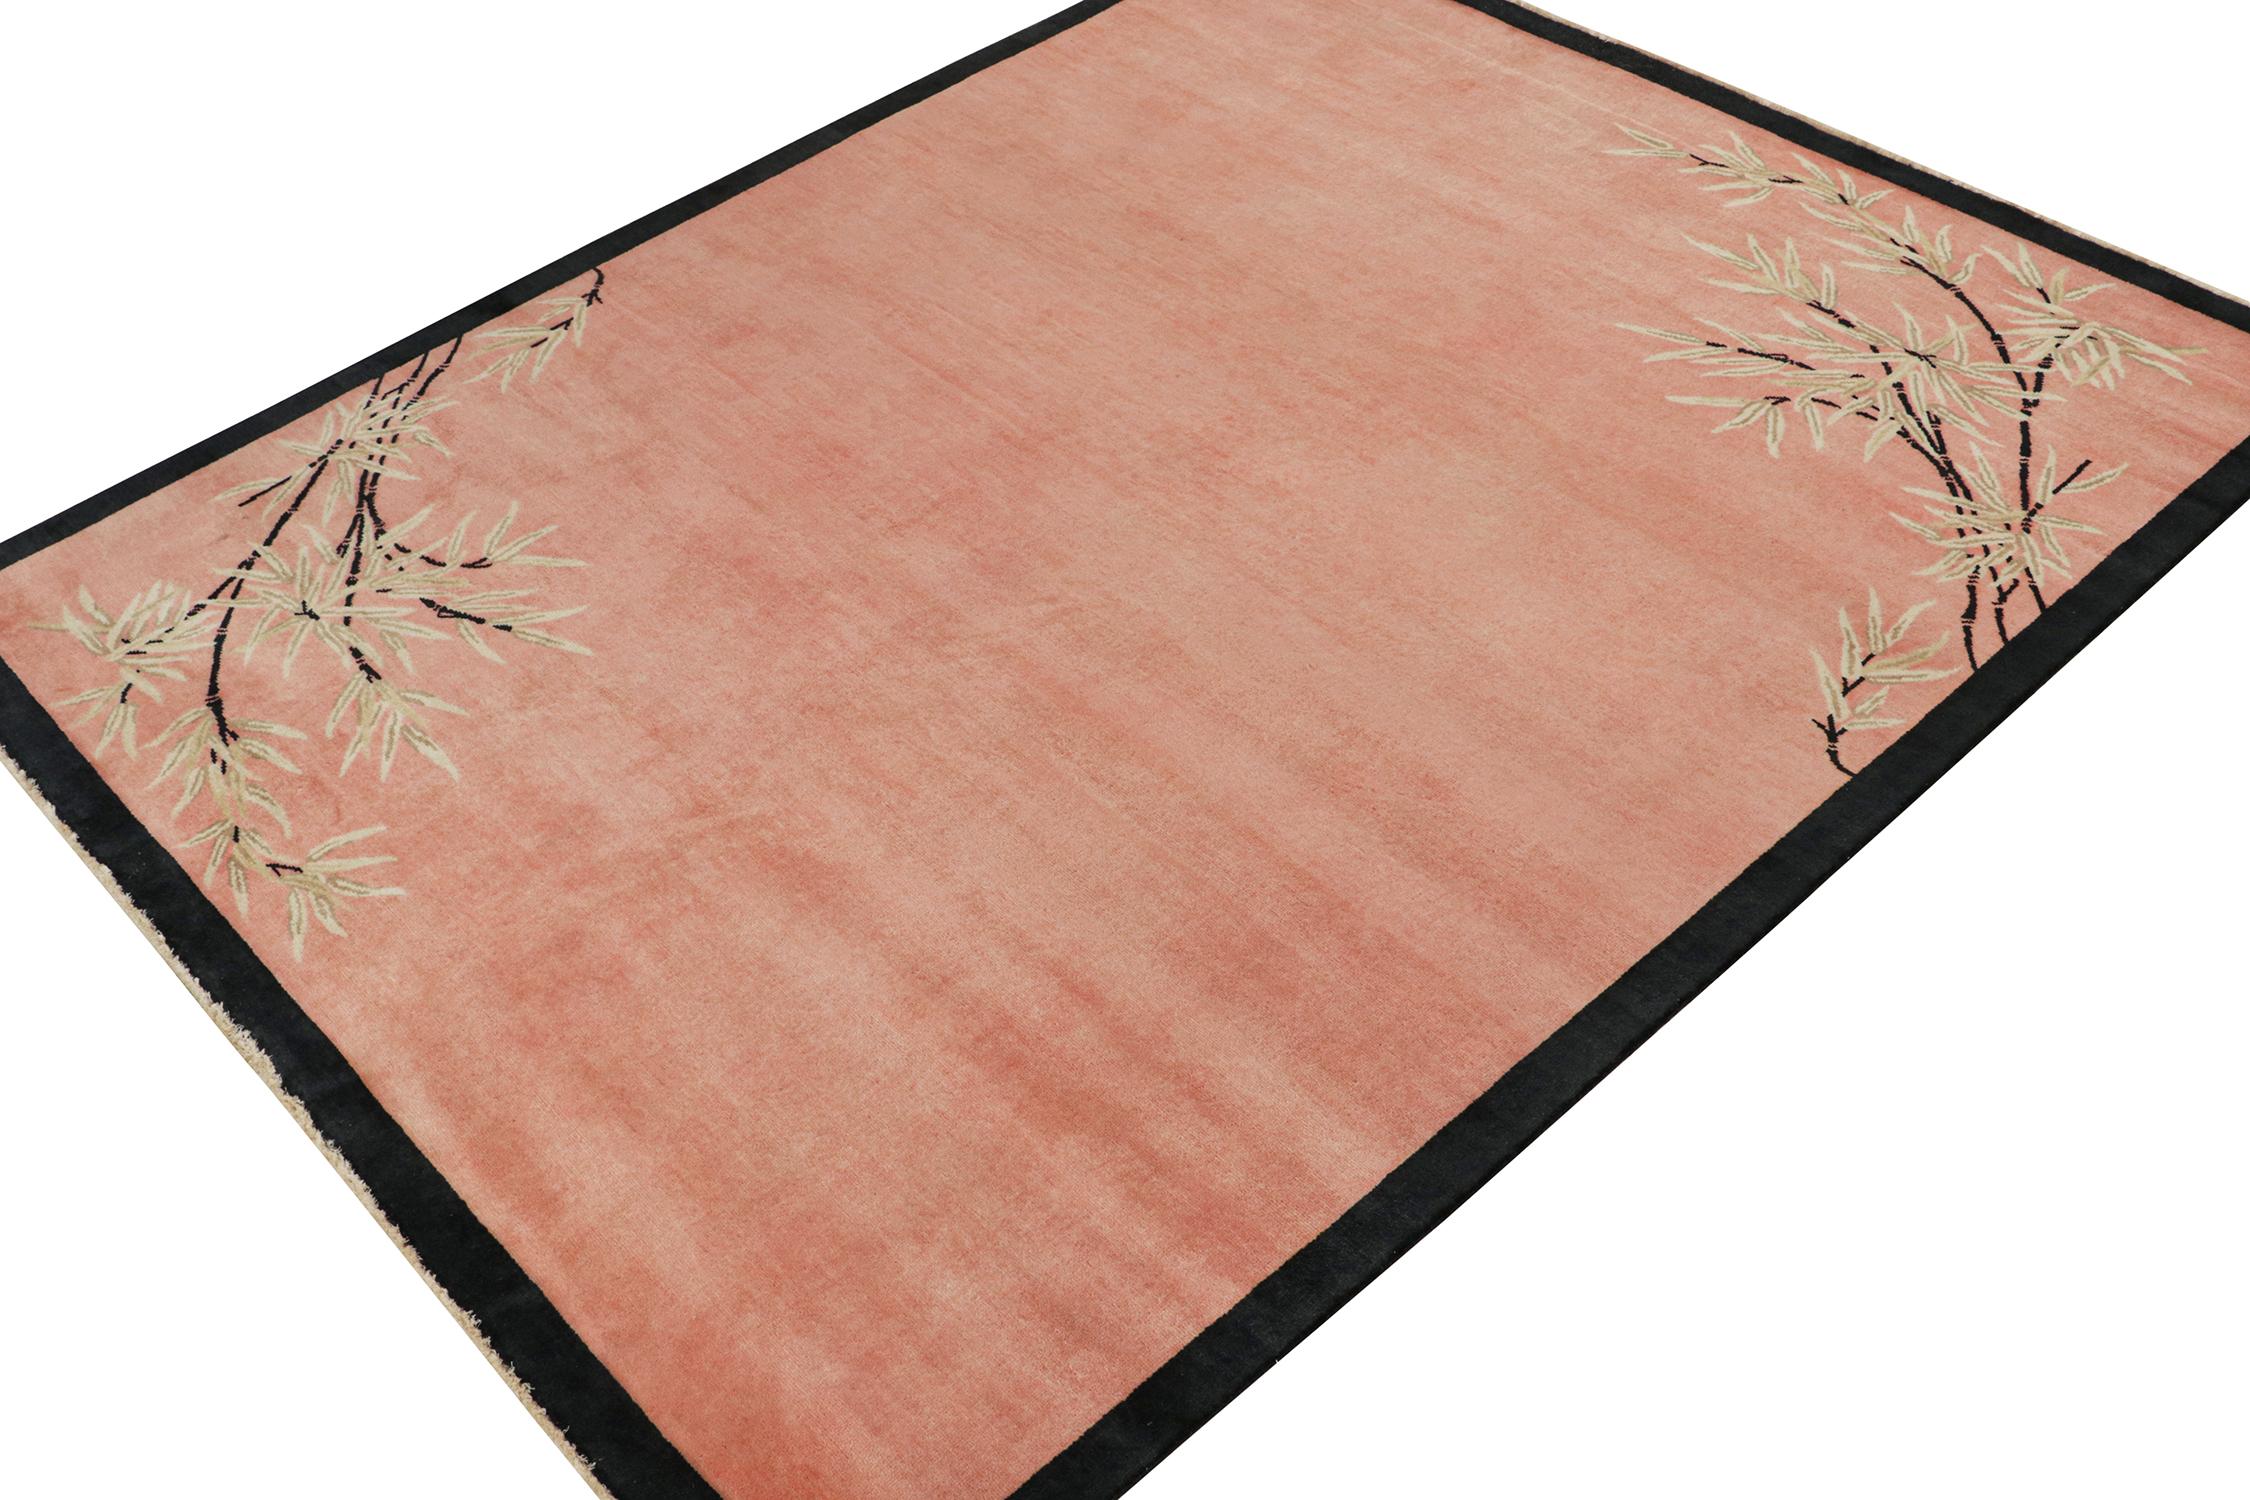 This 8x10 ode to Chinese Art Deco rugs is the next addition to Rug & Kilim's inspired new Deco Collection. 

Further On the Design:

The piece enjoys an emphasis on a warm pink background with finely detailed floral patterns within. Connoisseurs